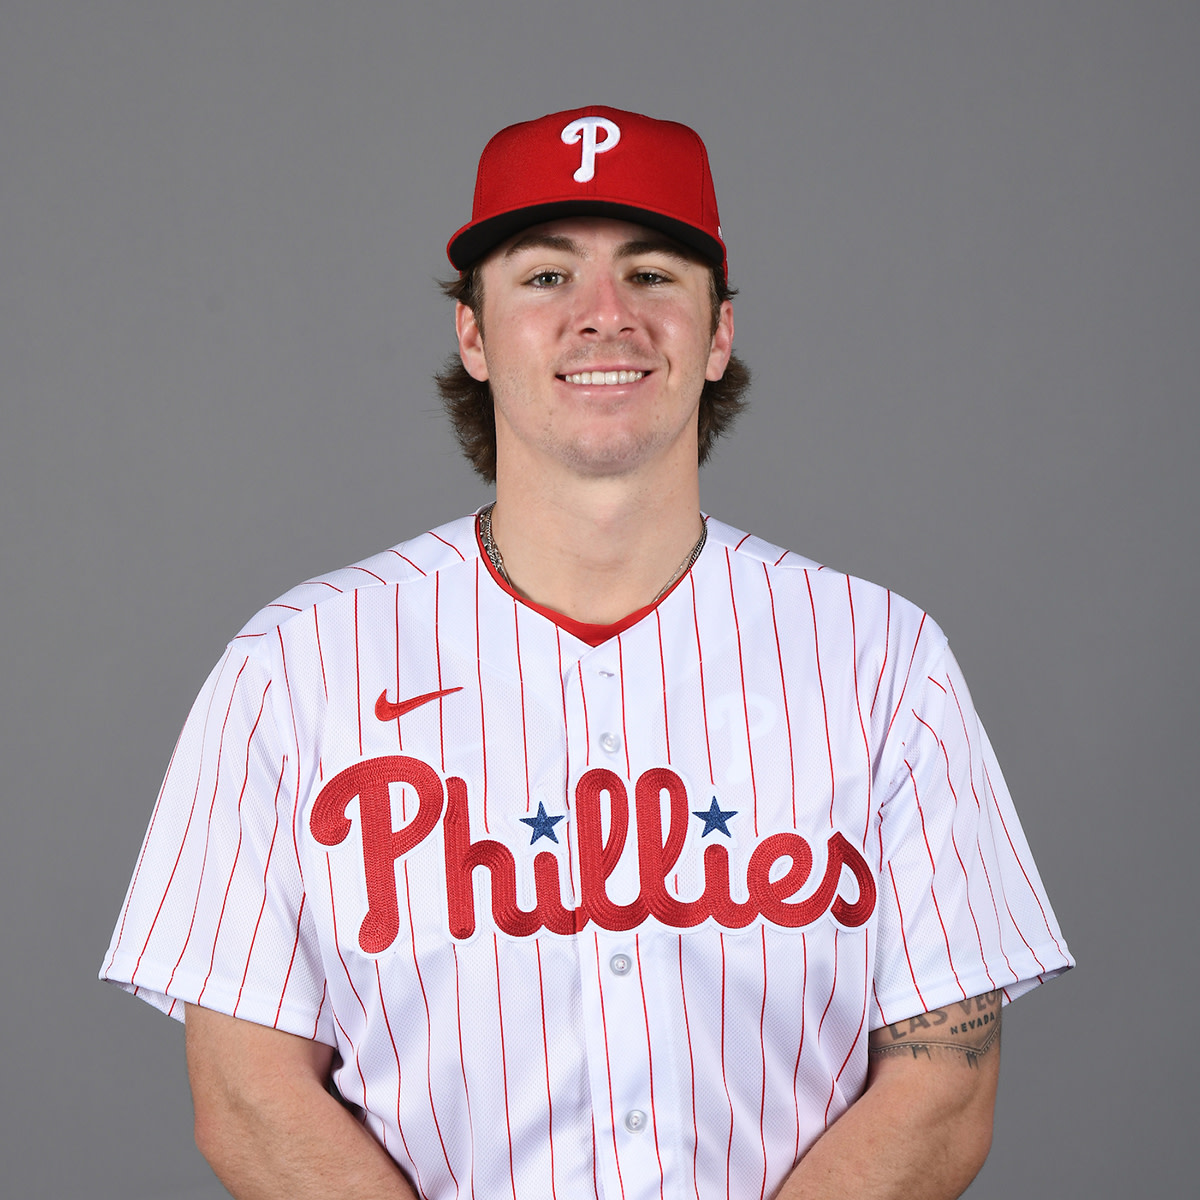 Get to know Phillies' stud rookie shortstop Bryson Stott 💯🔥Its